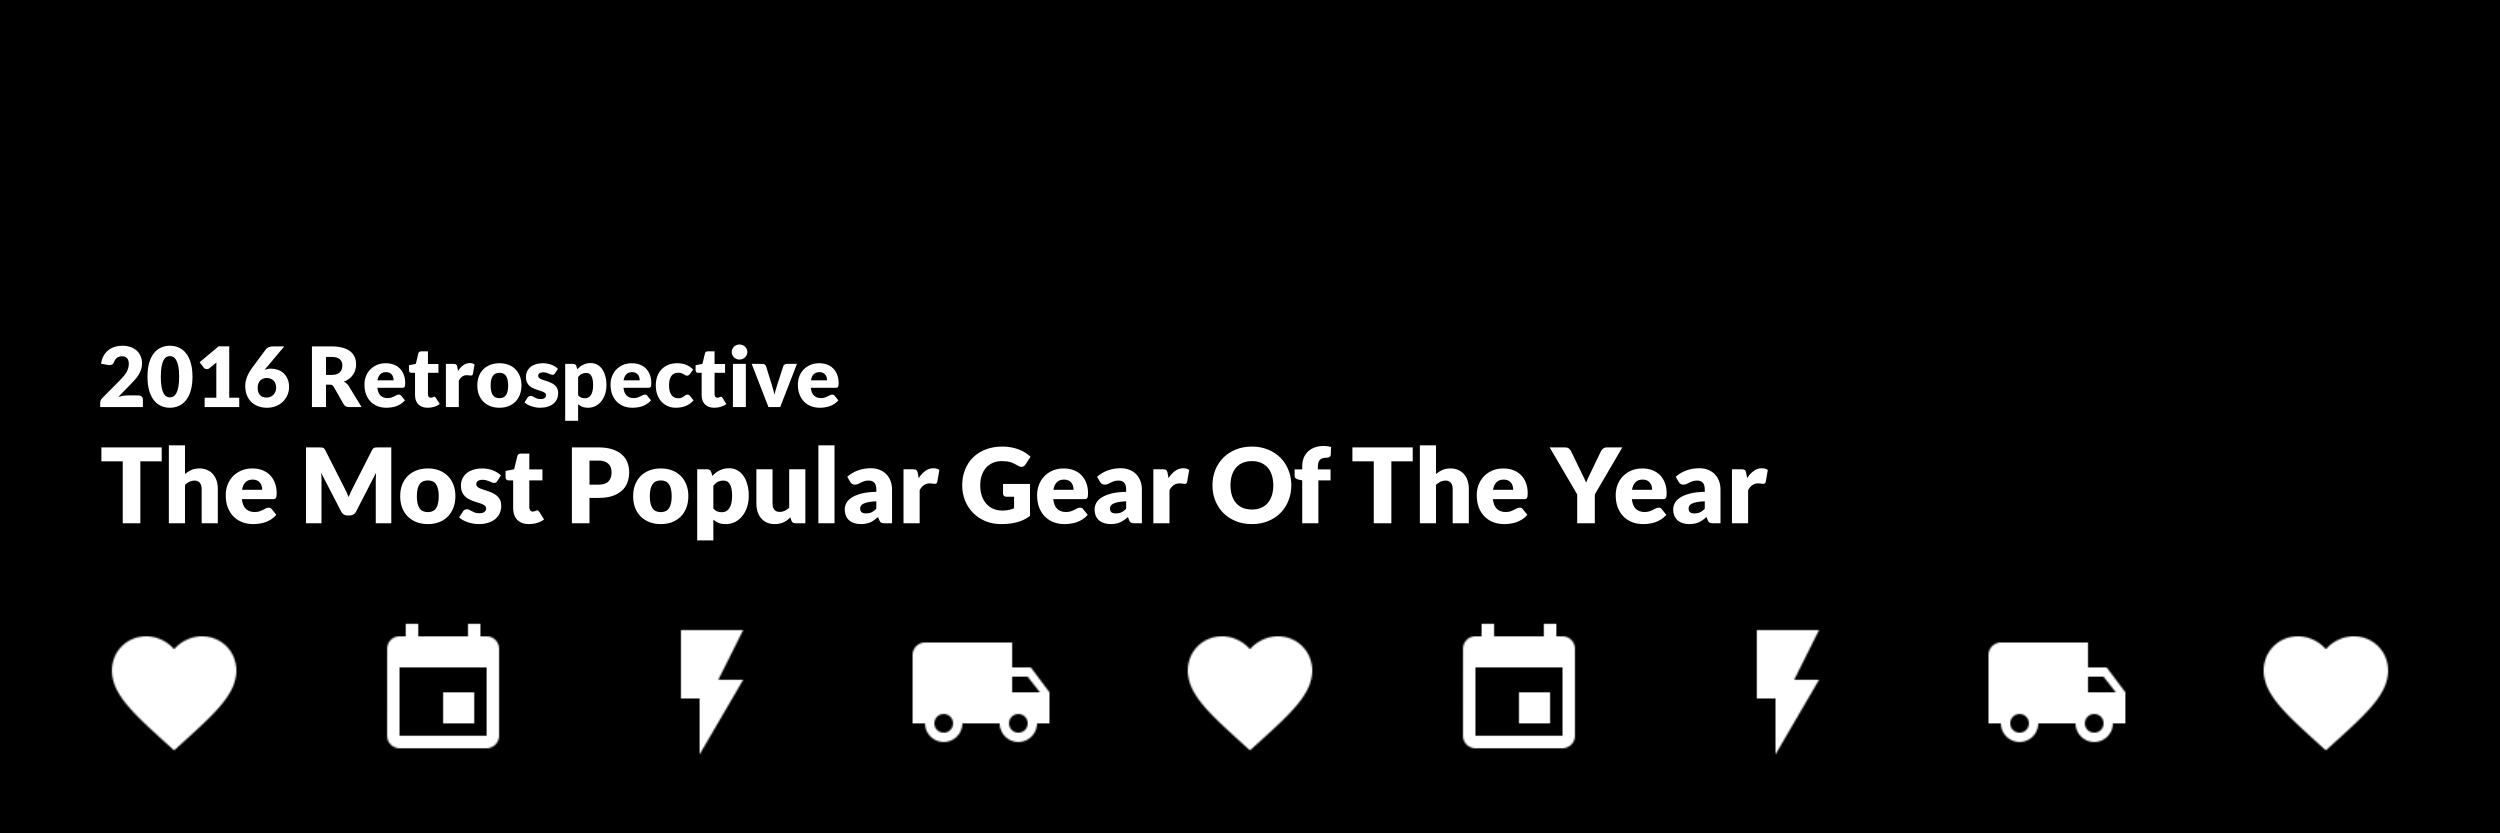 2016 Retrospective - The Most Popular Gear Of The Year